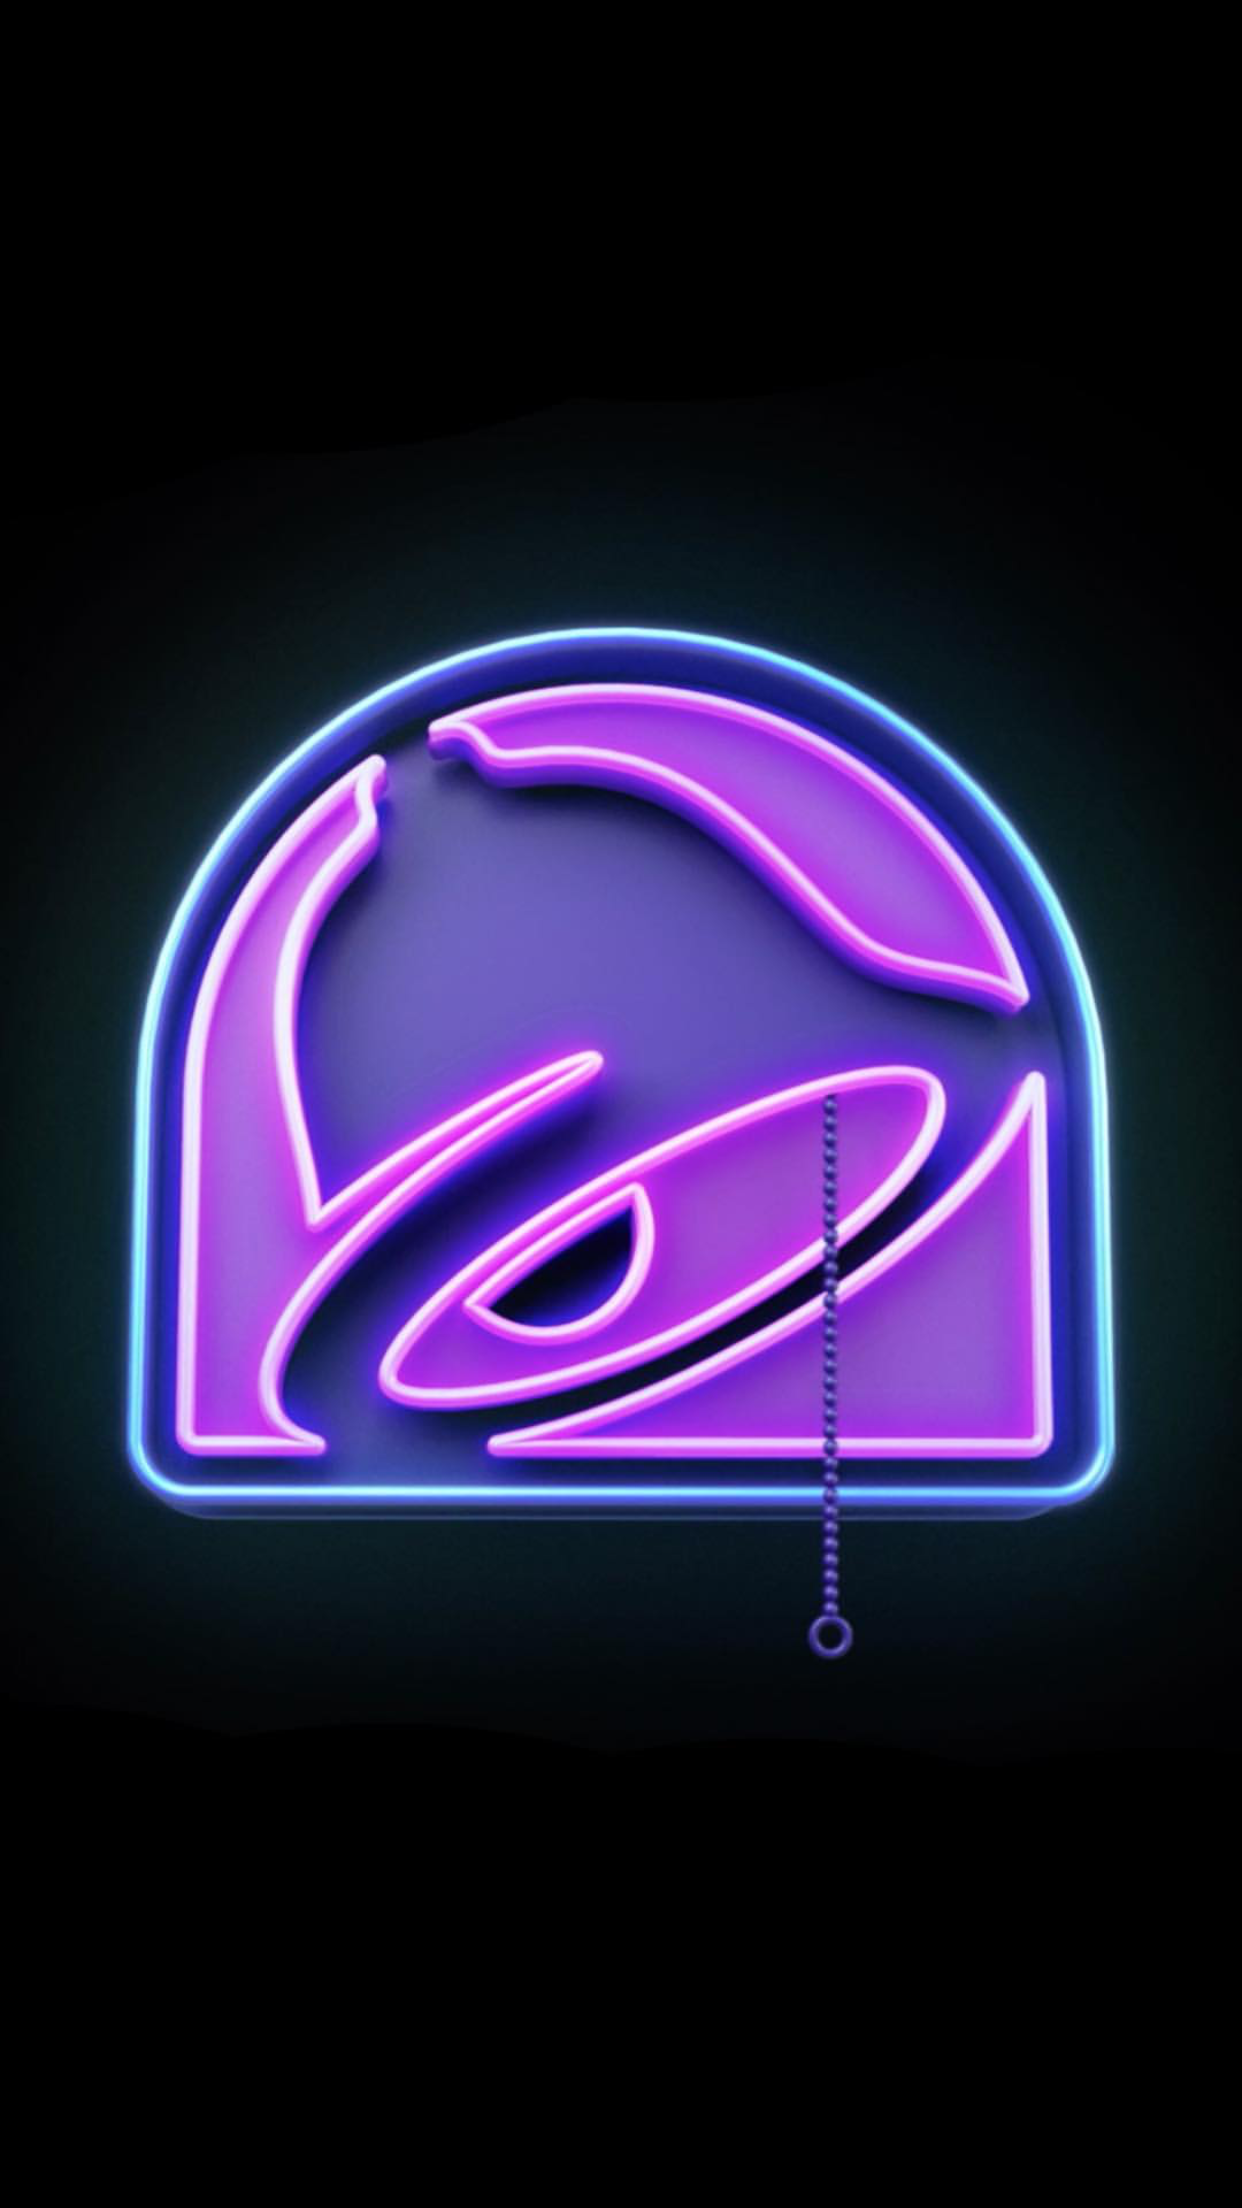 Taco Bell IPhone wallpaper #tacobell #iphone #wallpaper #aesthetic. Taco bell logo, Taco wallpaper, Taco bell